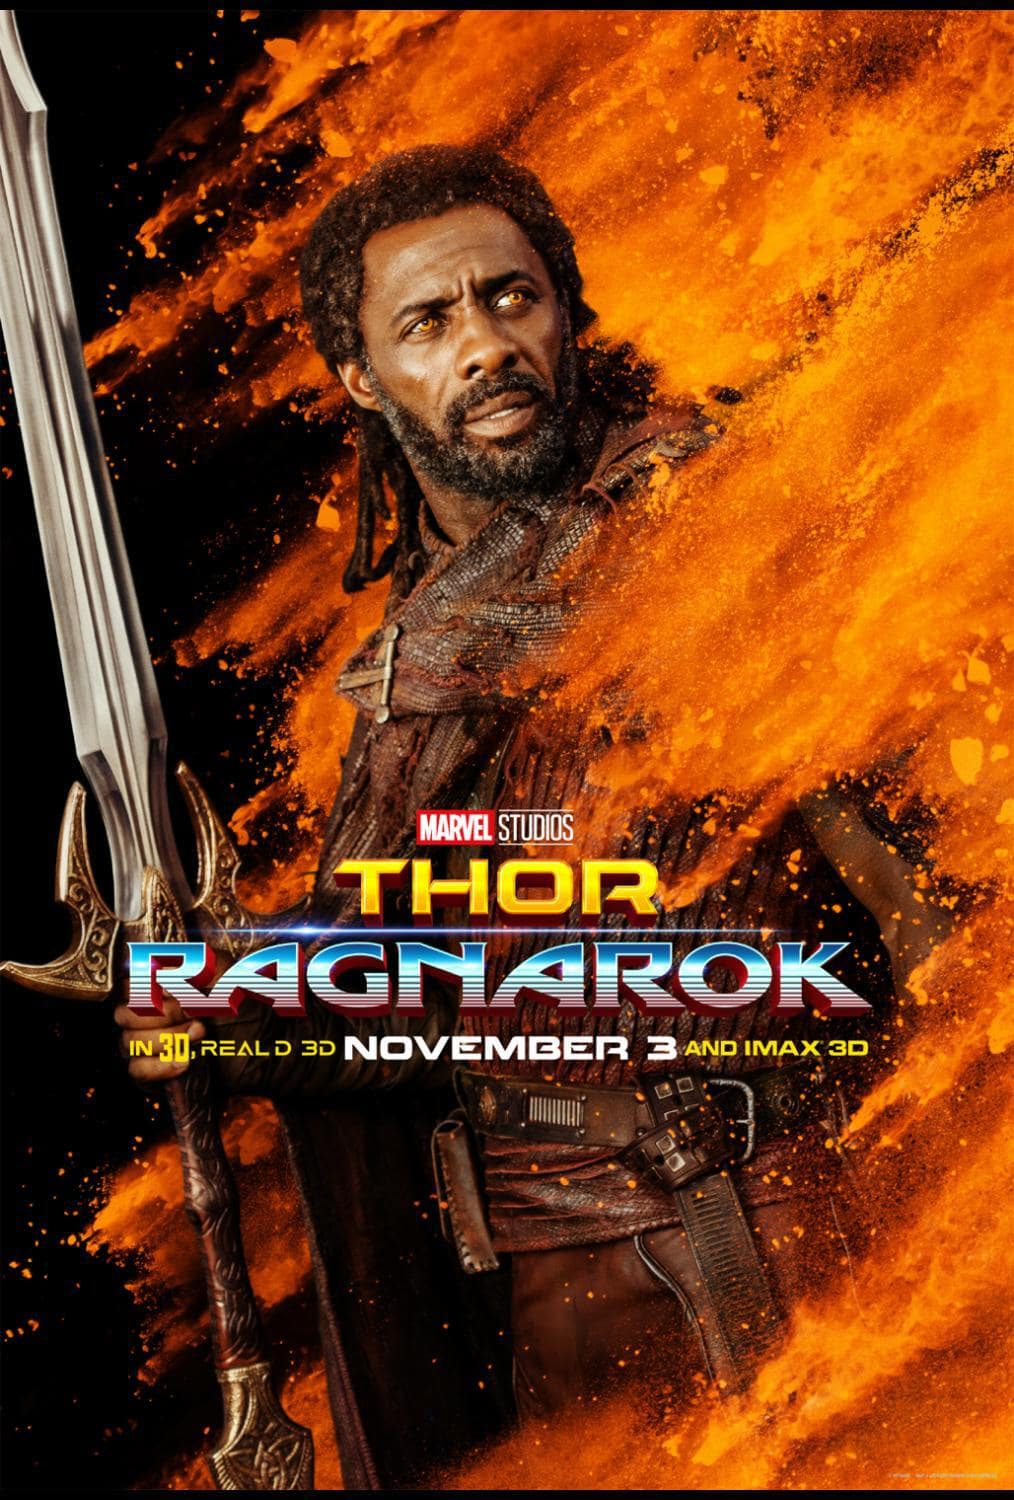 THOR: RAGNAROK New Posters Now Available